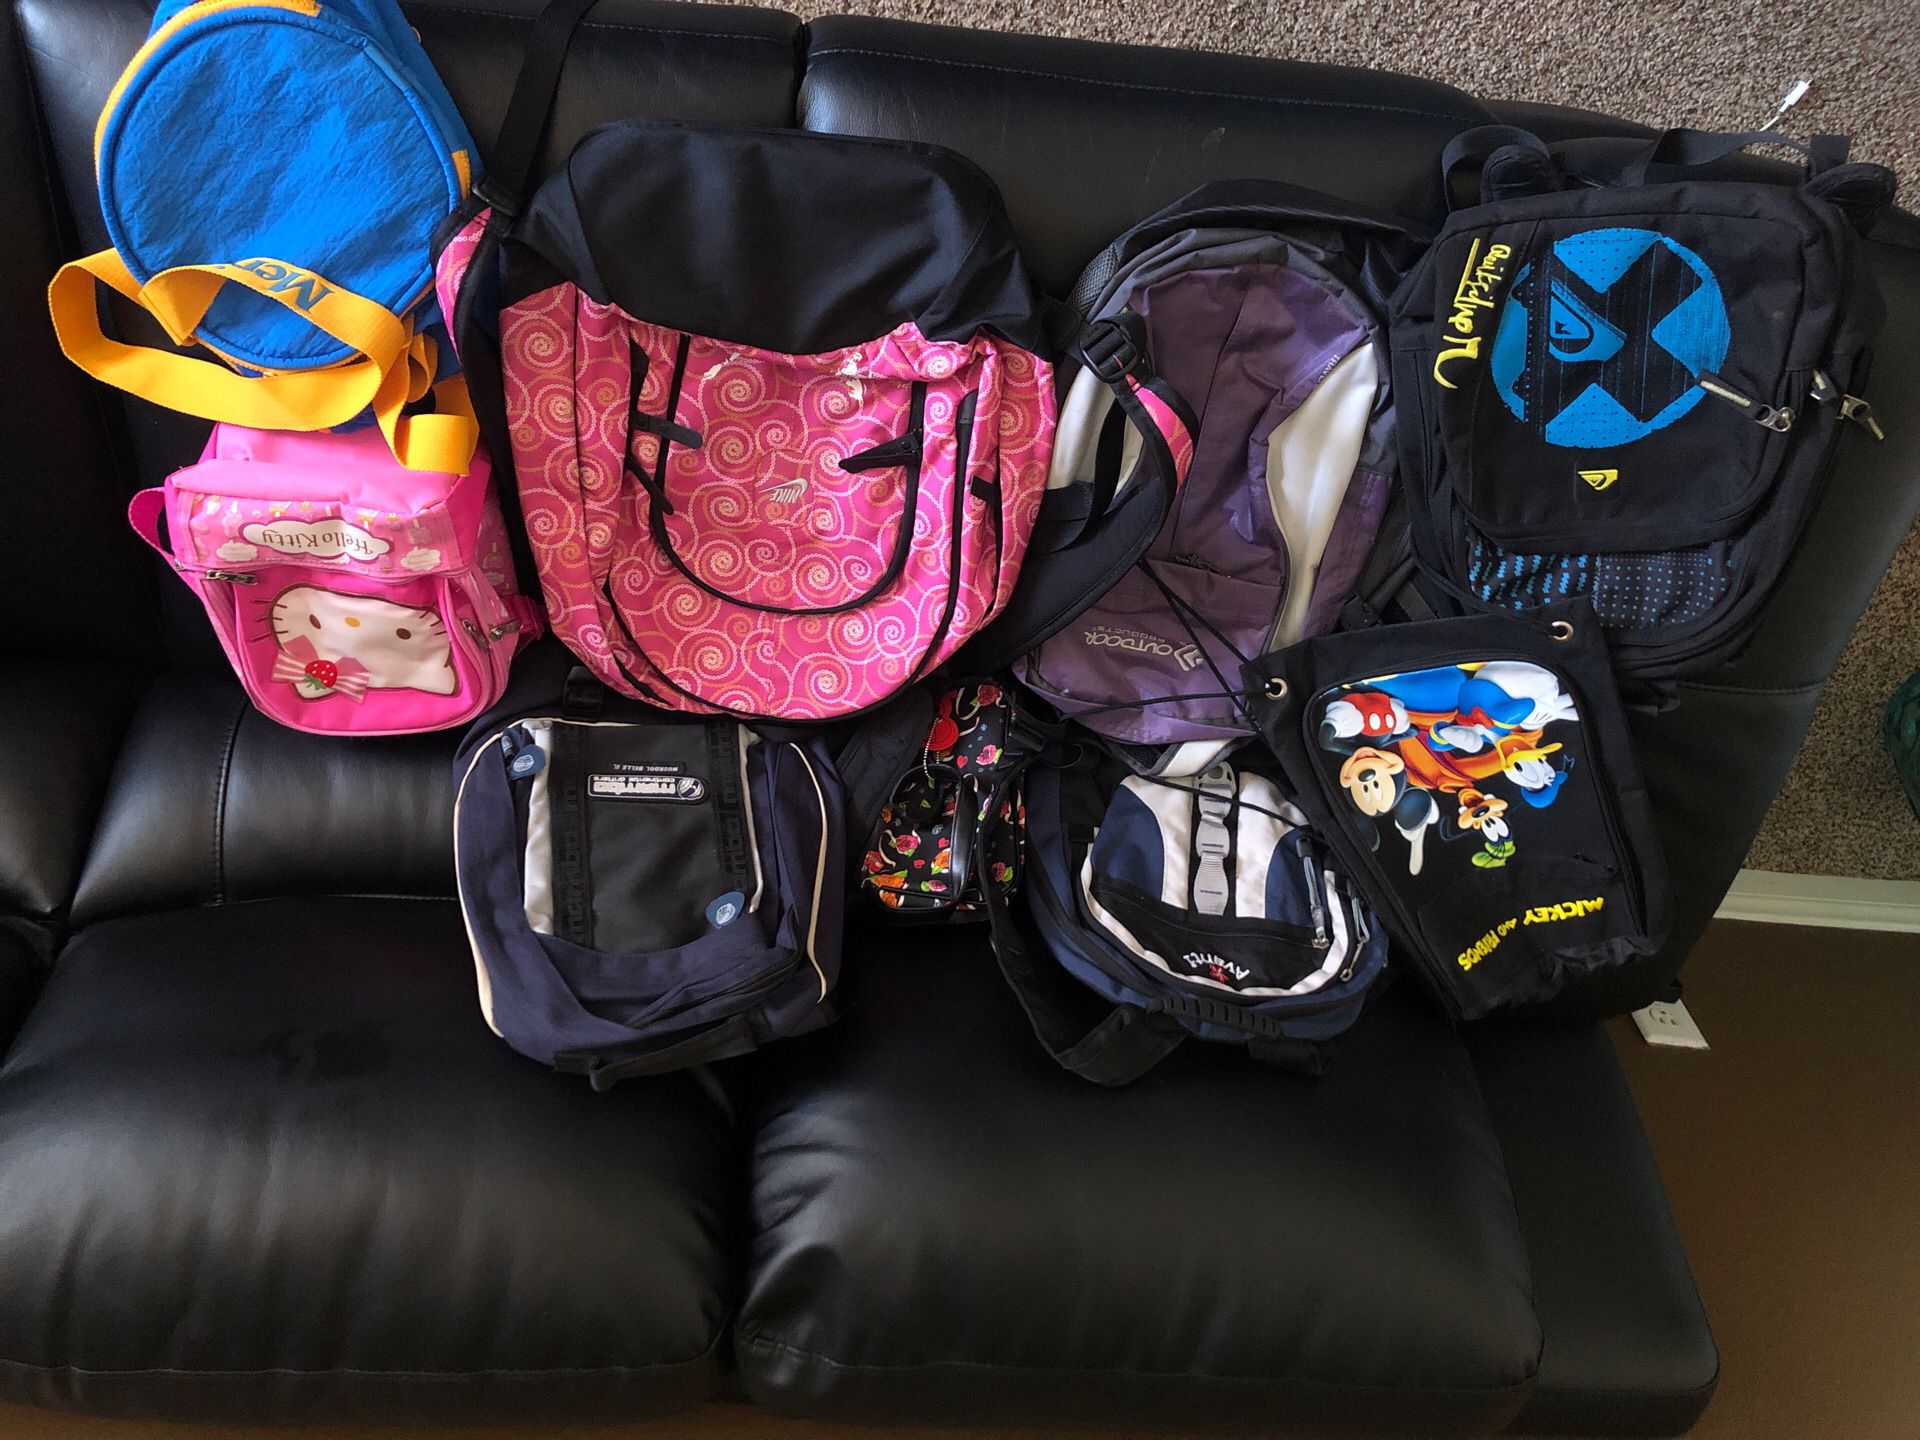 PALM SPRINGS MINI backpack for Sale in Las Vegas, NV - OfferUp